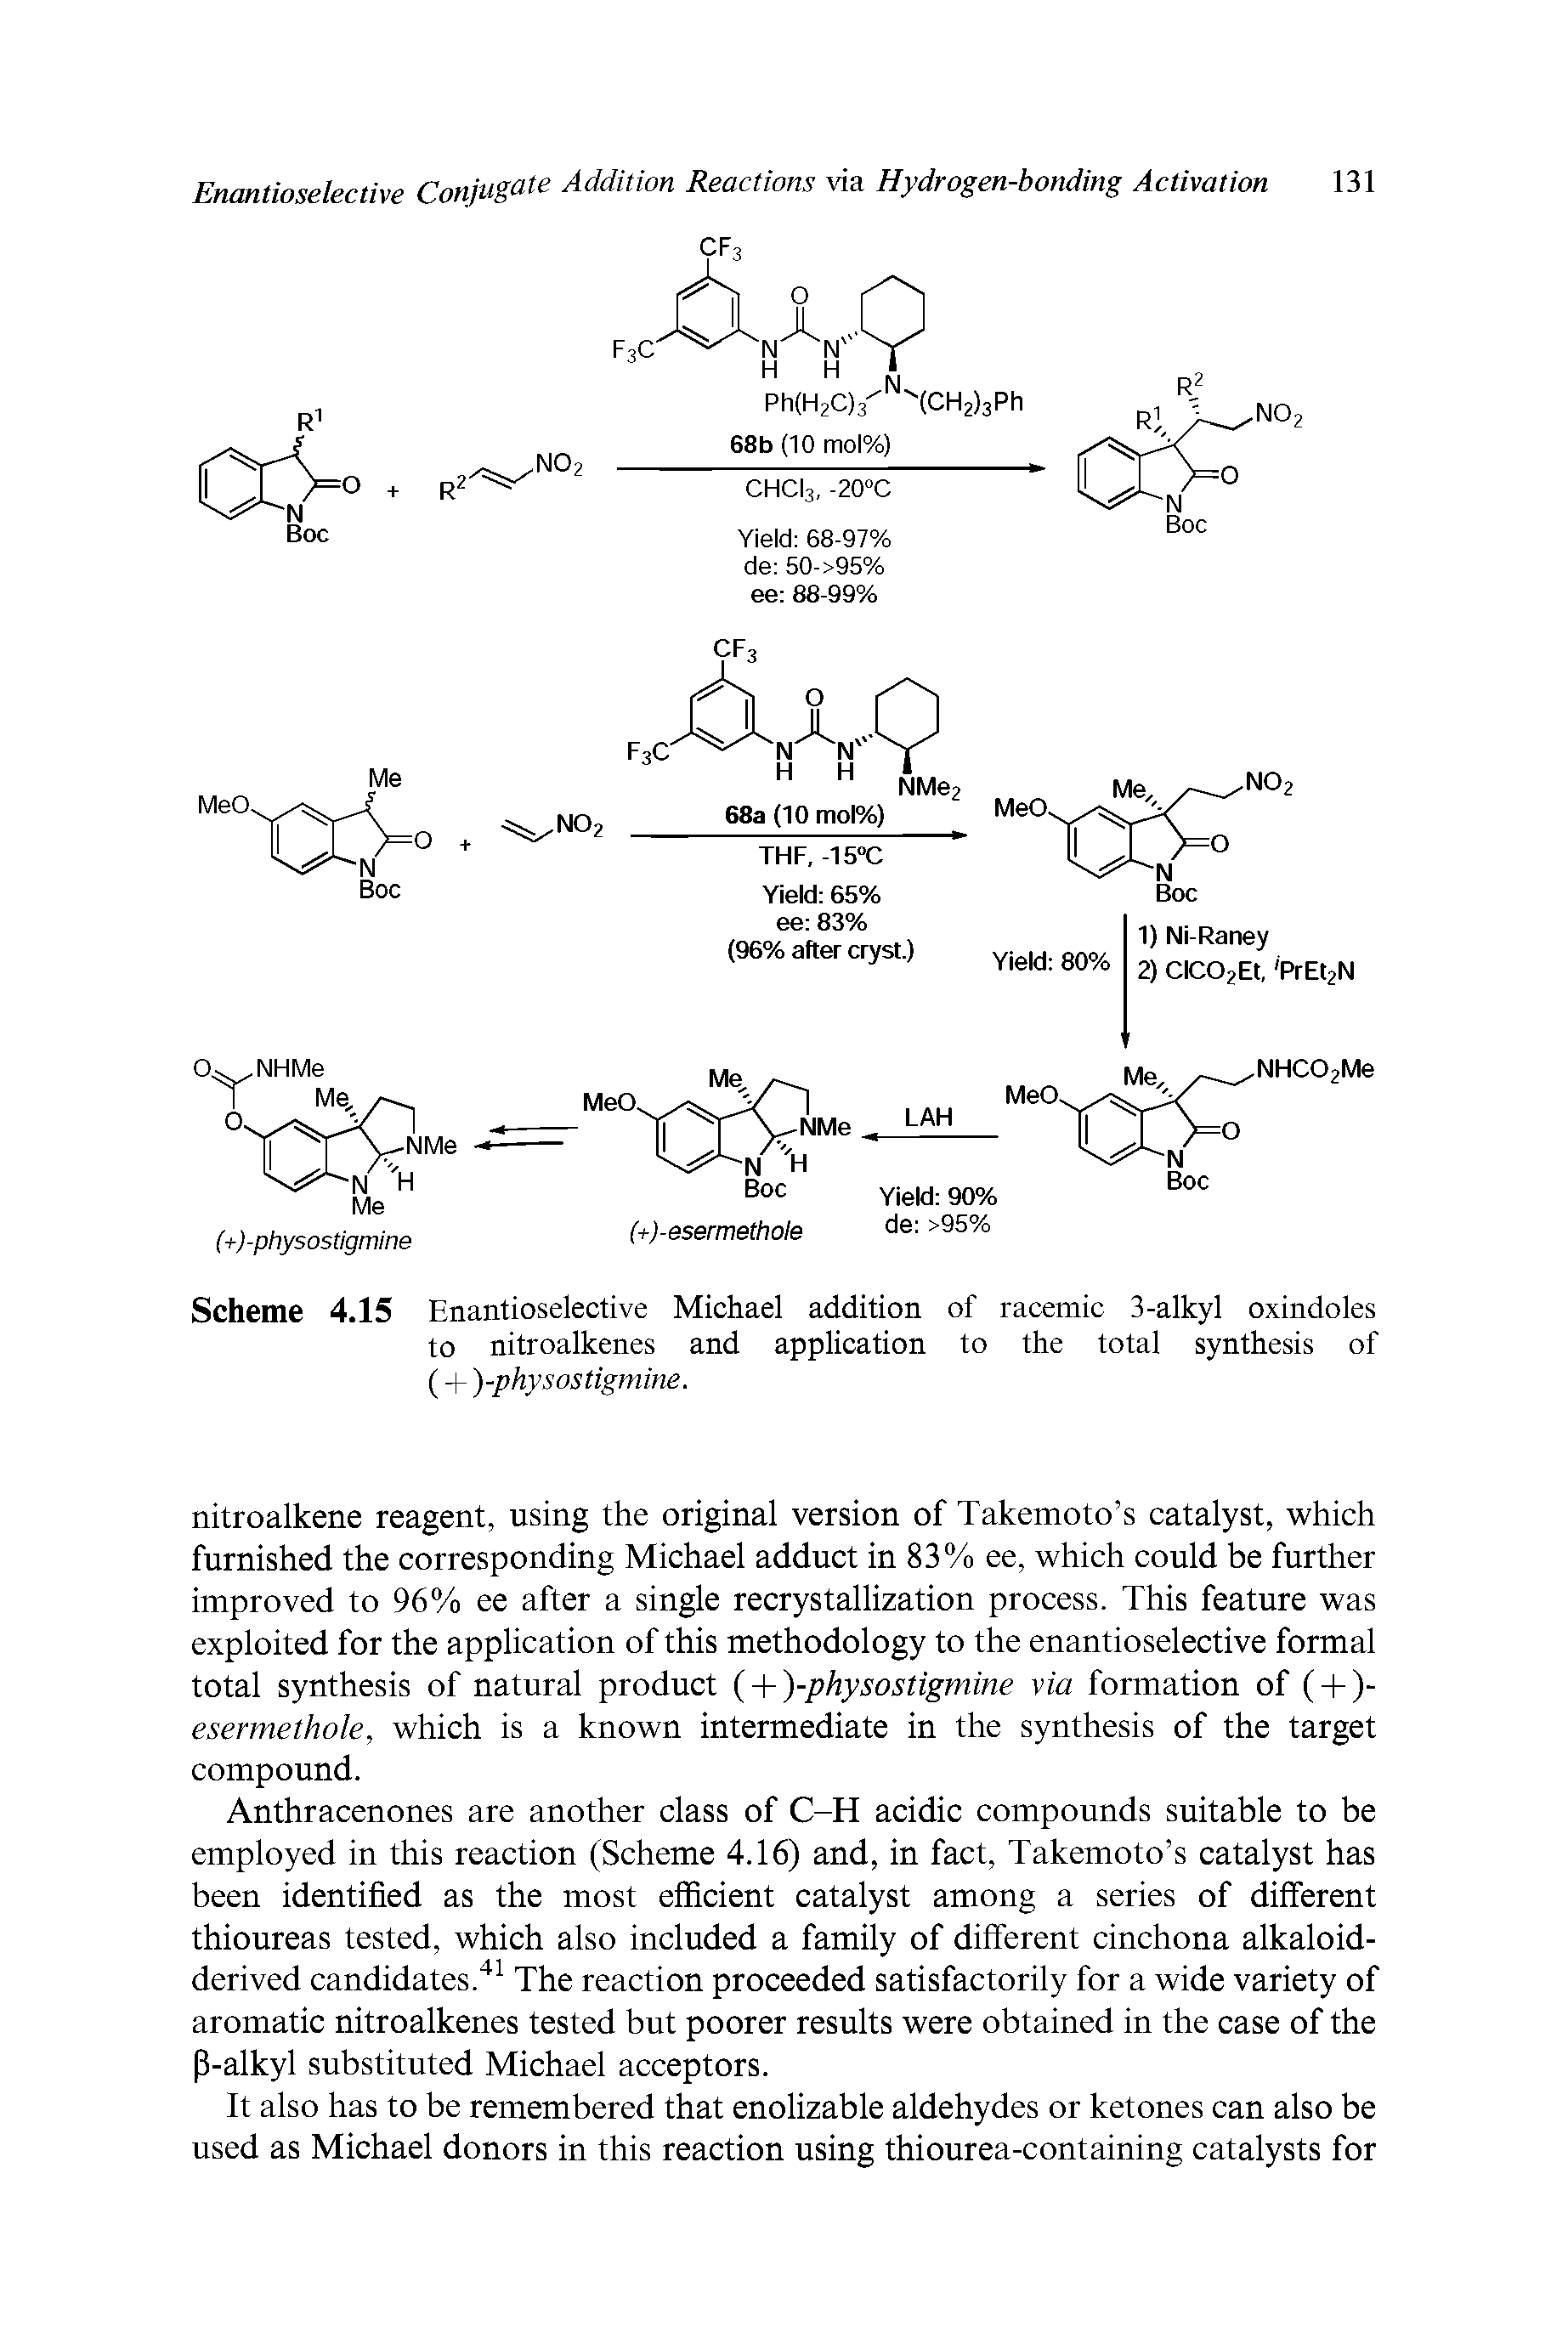 Scheme 4.15 Enantioselective Michael addition of racemic 3-alkyl oxindoles to nitroalkenes and application to the total synthesis of ( + )-physostigmine.